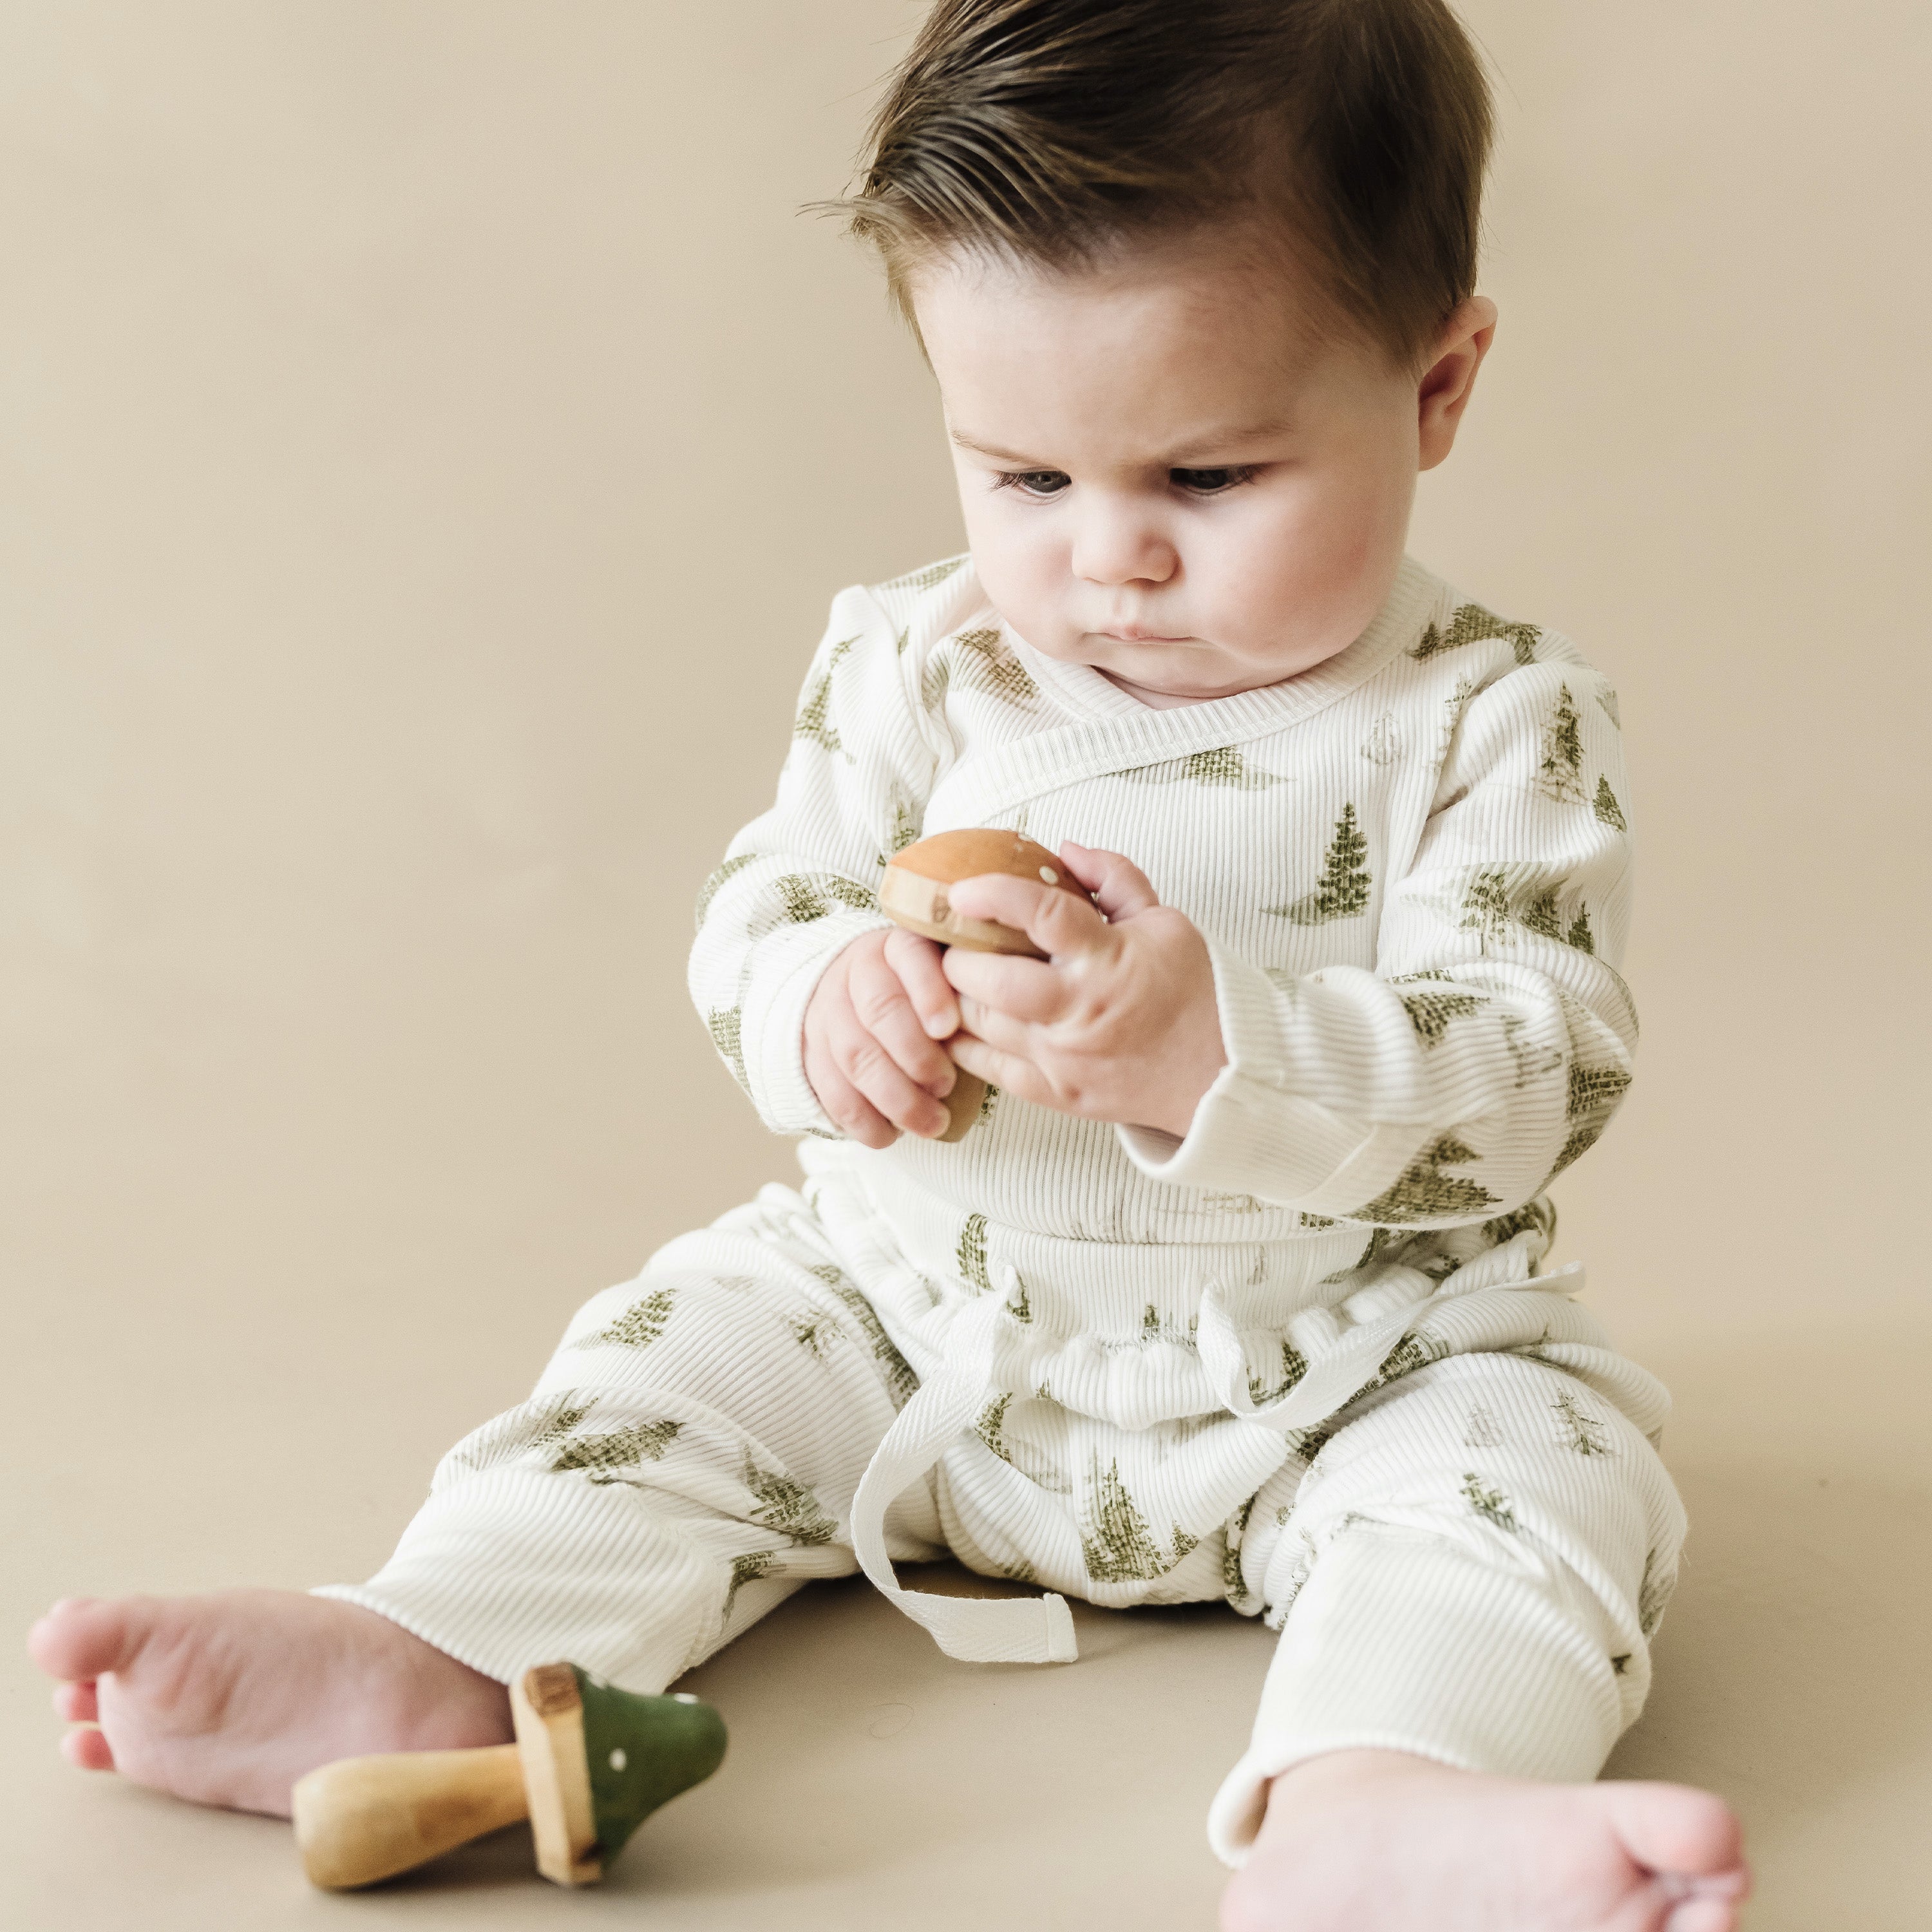 A baby in a white and green Organic Baby outfit sits on a beige surface, intently examining a wooden toy, with another toy beside them.